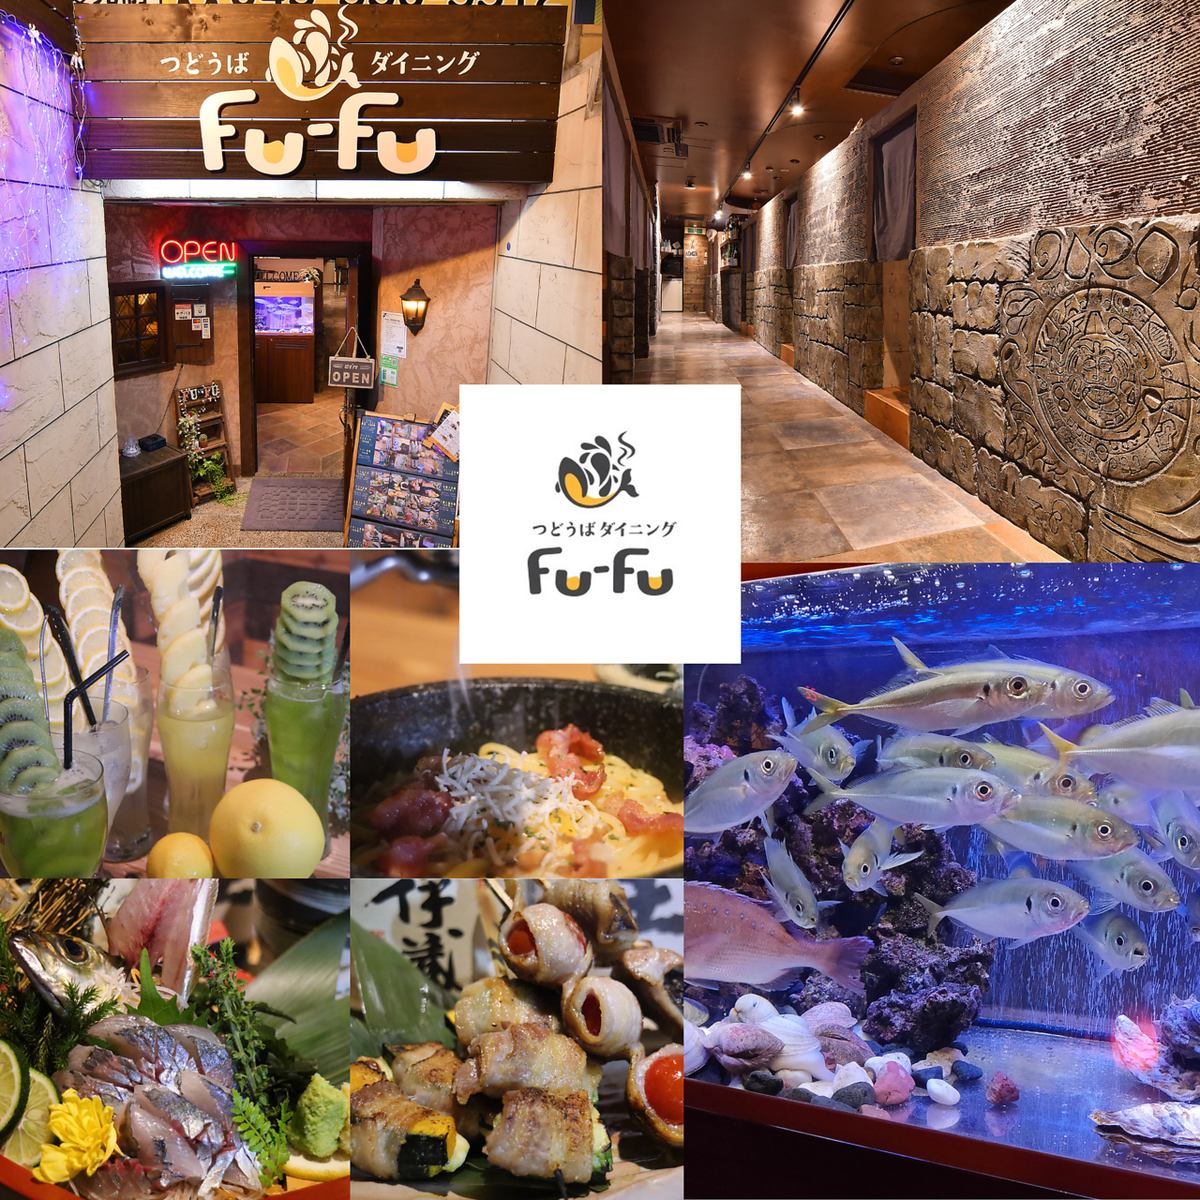 [It's almost the 2nd anniversary] A seafood izakaya with semi-private rooms where you can enjoy freshly caught seafood and creative dishes!